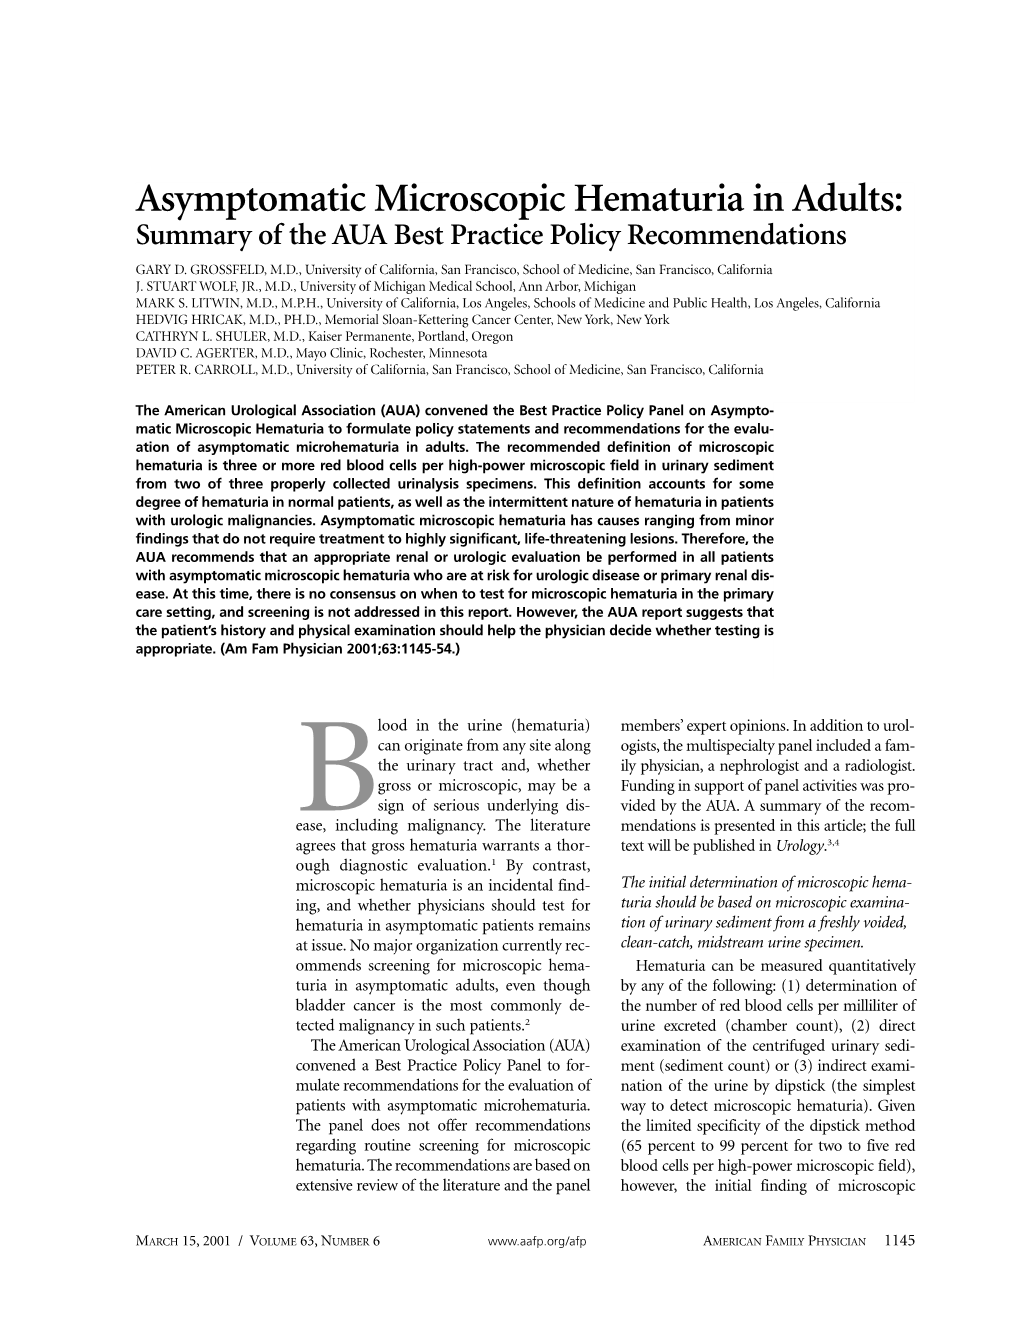 Asymptomatic Microscopic Hematuria in Adults: Summary of the AUA Best Practice Policy Recommendations GARY D